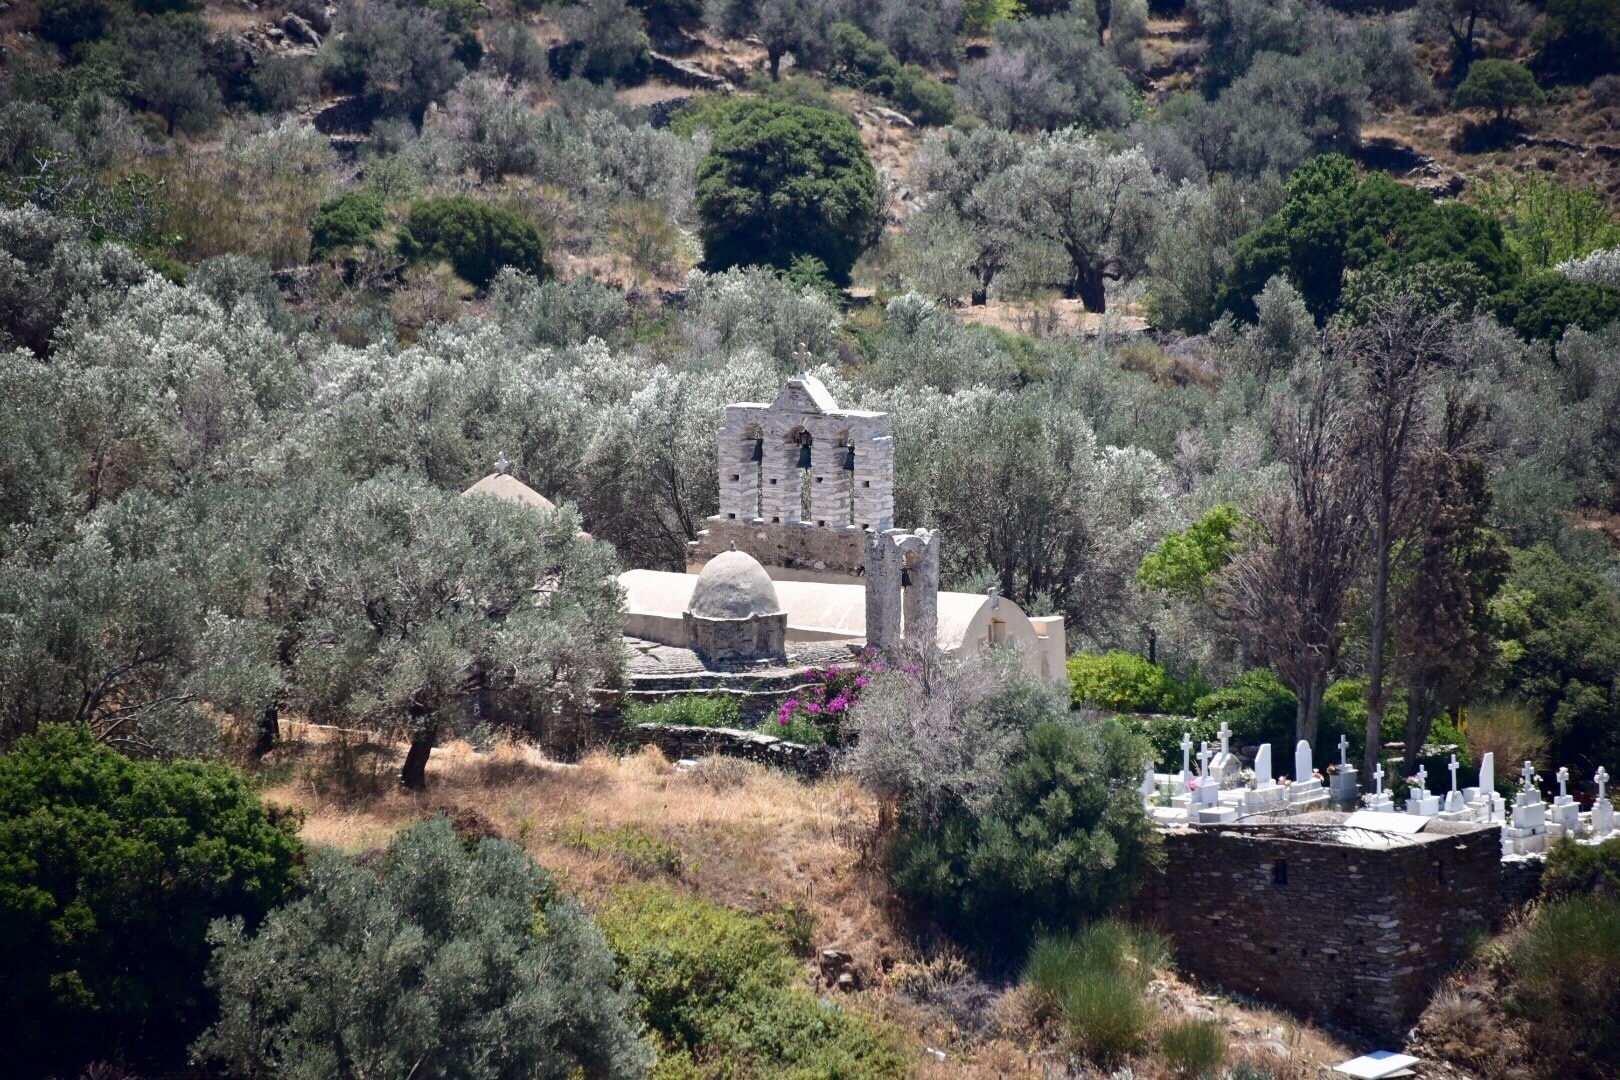 The oldest church of Naxos. The church Panagia (Virgin) Drosiani is located between the Tragaia area and the village Moni. The cluster of temples of Drosiani was built in the 6th century.